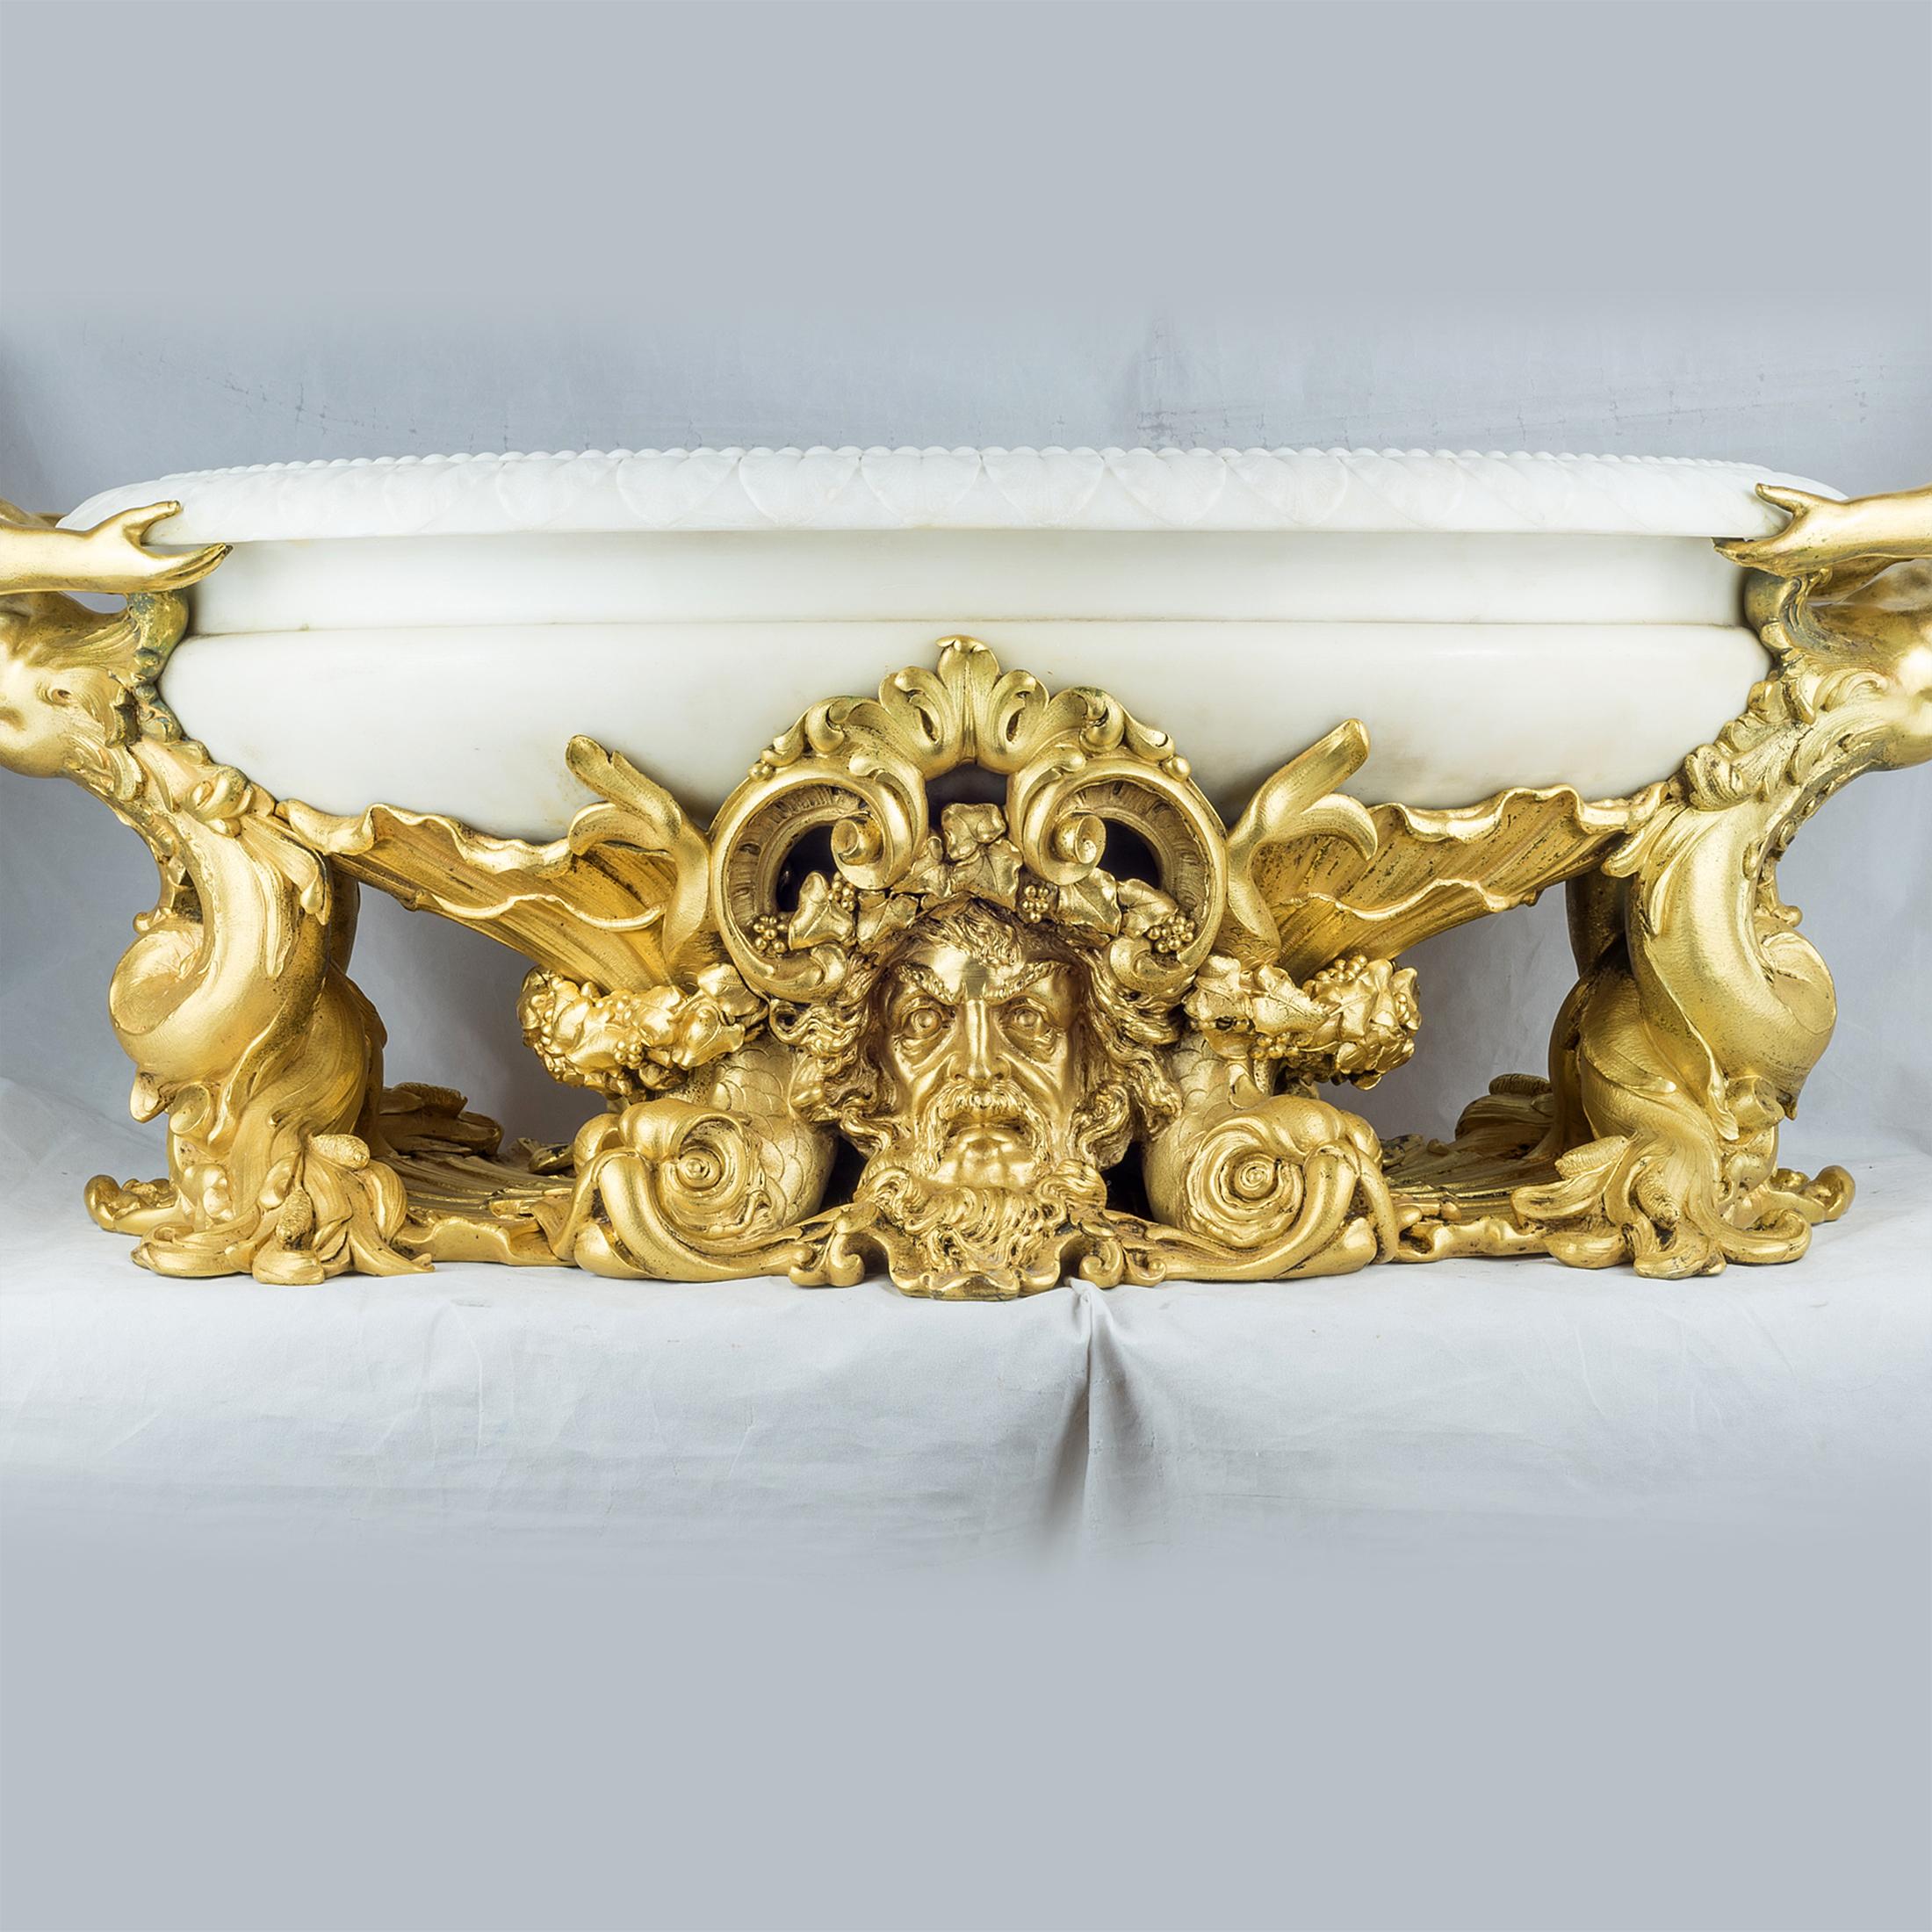 North American Magnificent Large Caldwell & Co. Ormolu and White Marble Centerpiece